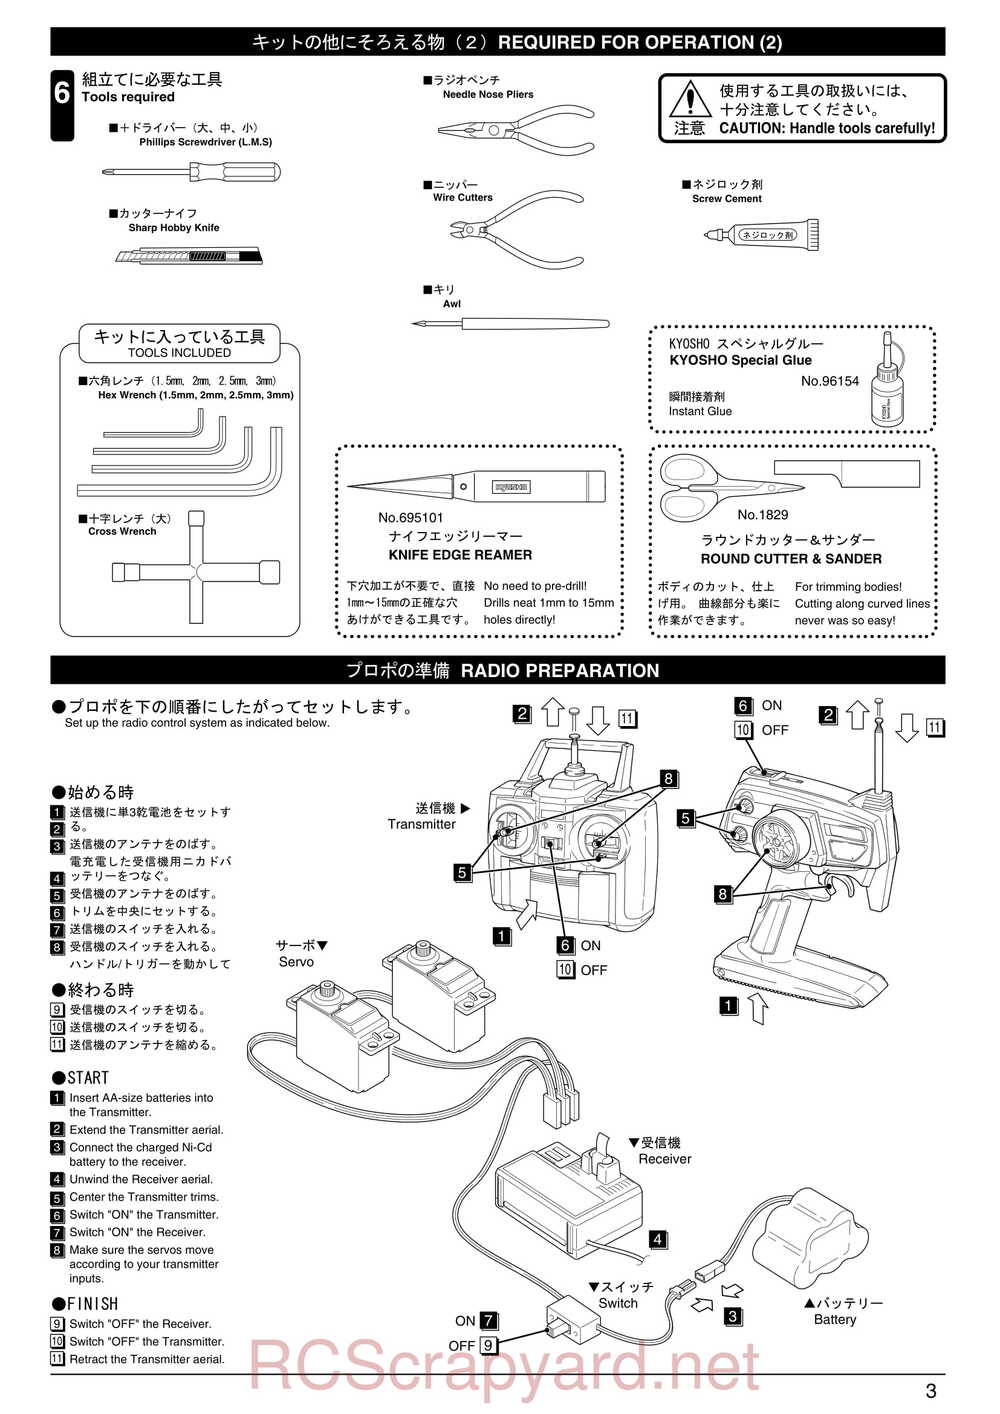 Kyosho - 31224 - Mad-Armour - Manual - Page 03